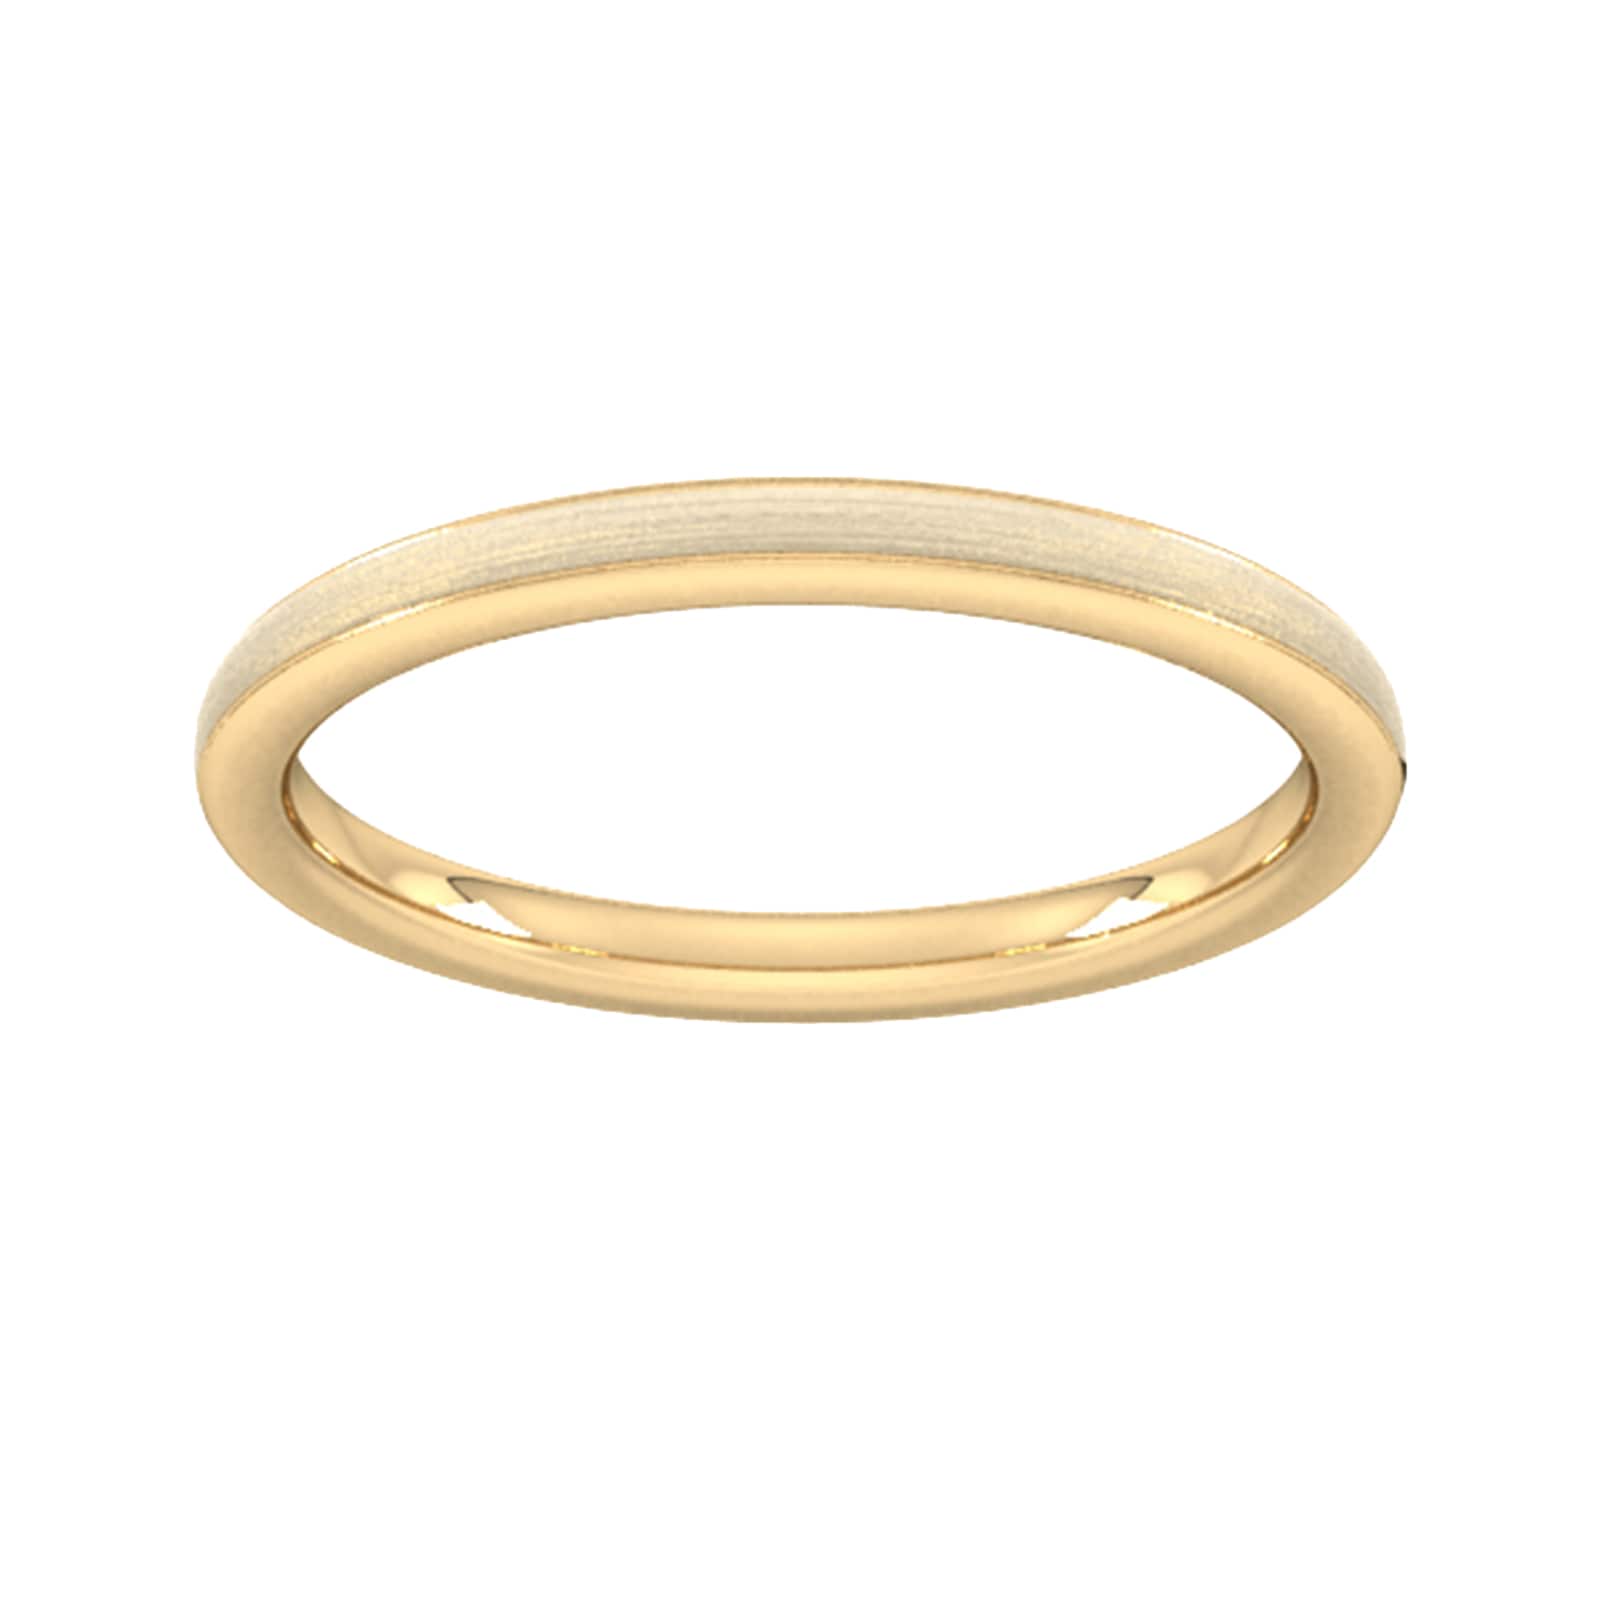 2mm Slight Court Heavy Matt Centre With Grooves Wedding Ring In 9 Carat Yellow Gold - Ring Size Q